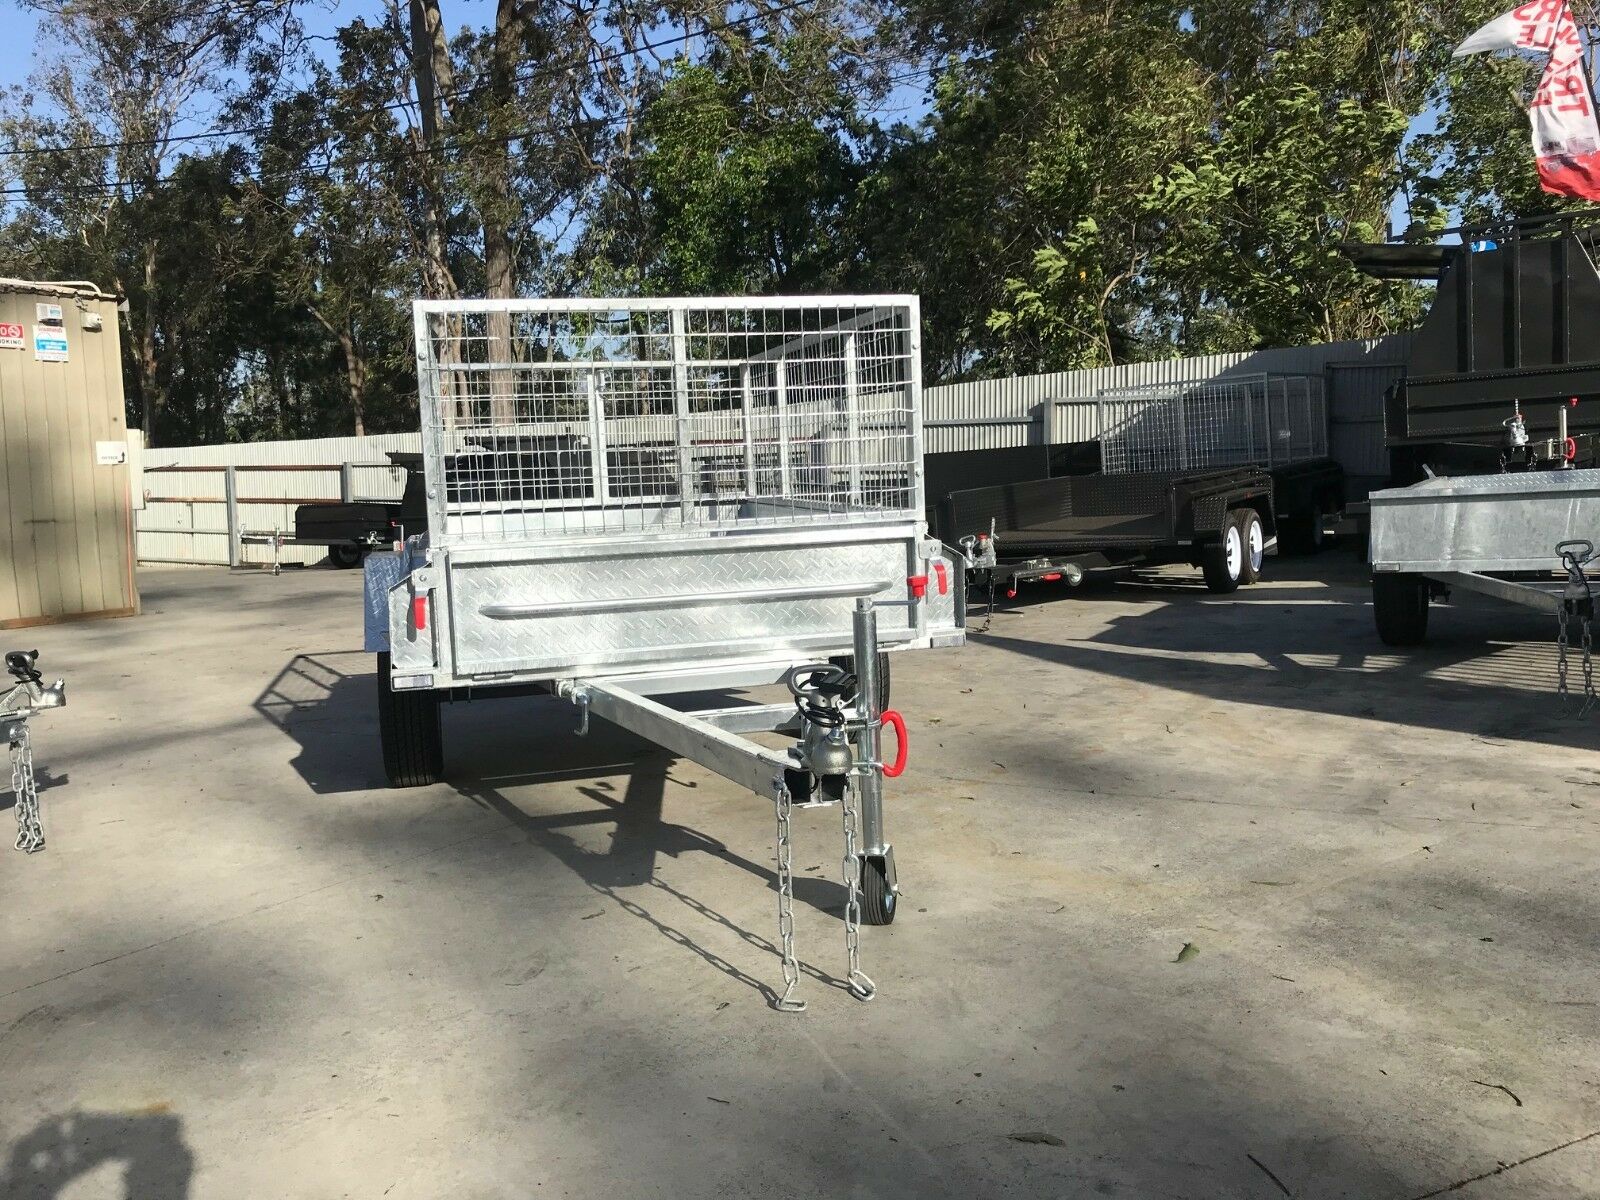 7×4 Heavy Duty Single Axle Galvanised Box Trailer with 2 Ft Cage for Sale in Brisbane